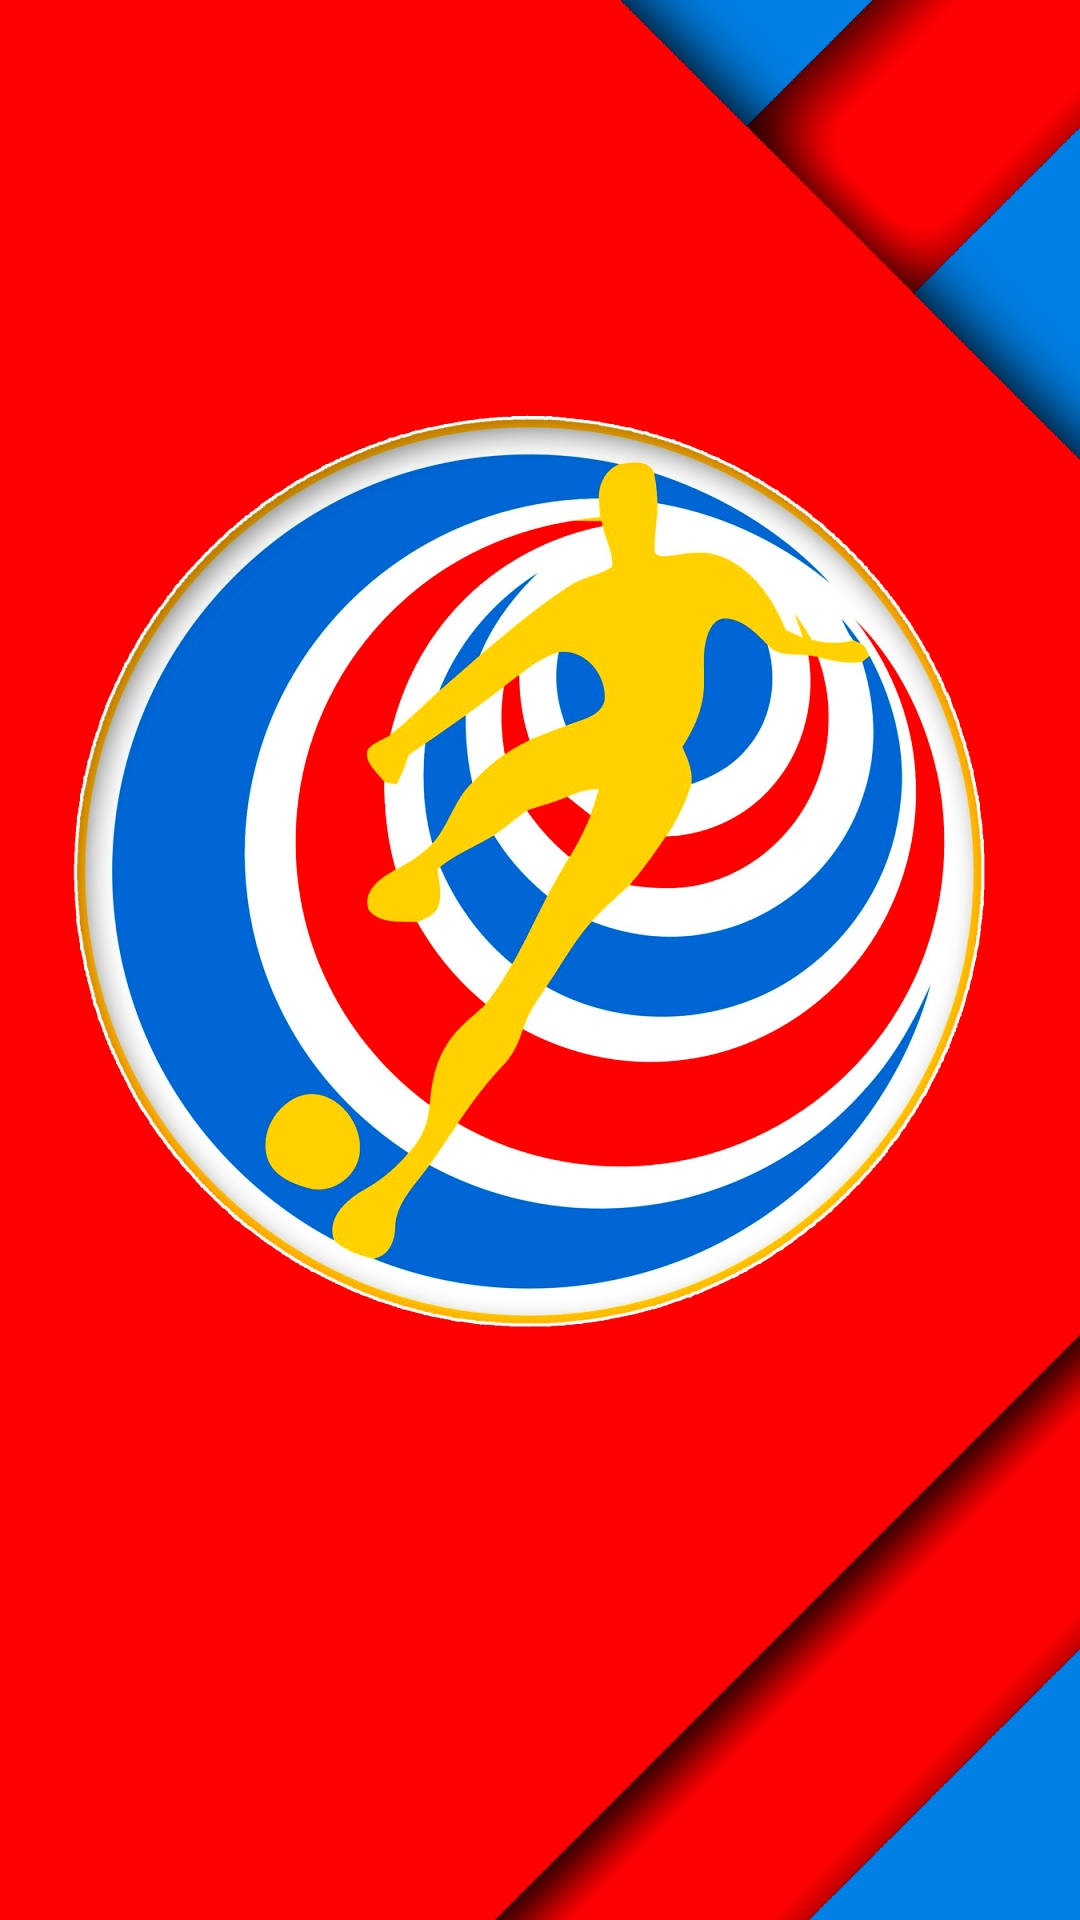 Costa Rica National Football Team Wallpapers